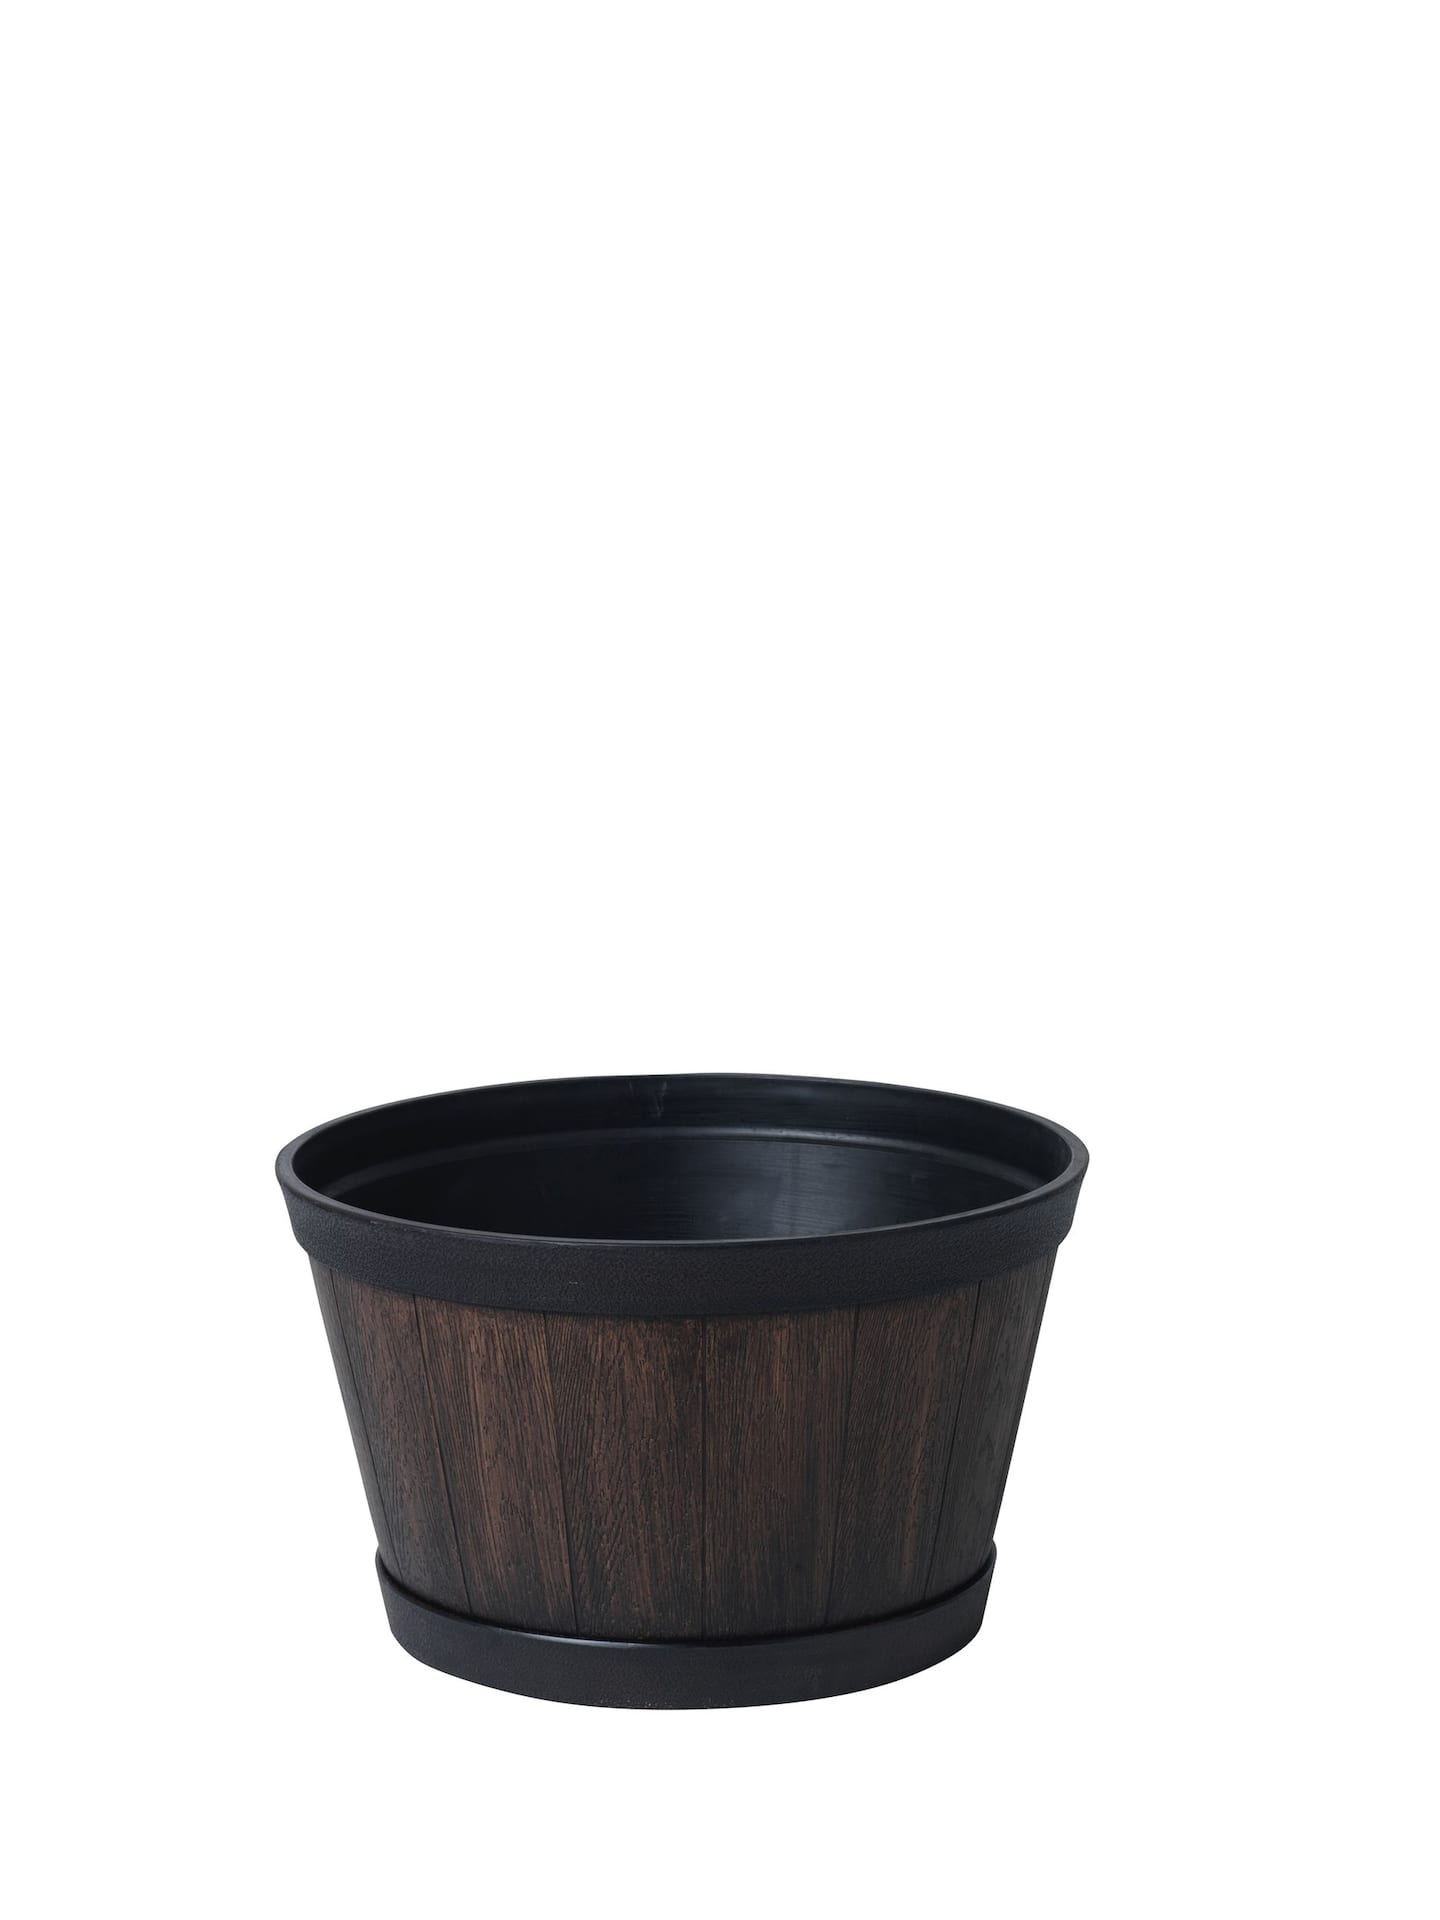 Southern Patio Whiskey Resin Round Barrel Planter, Assorted Sizes